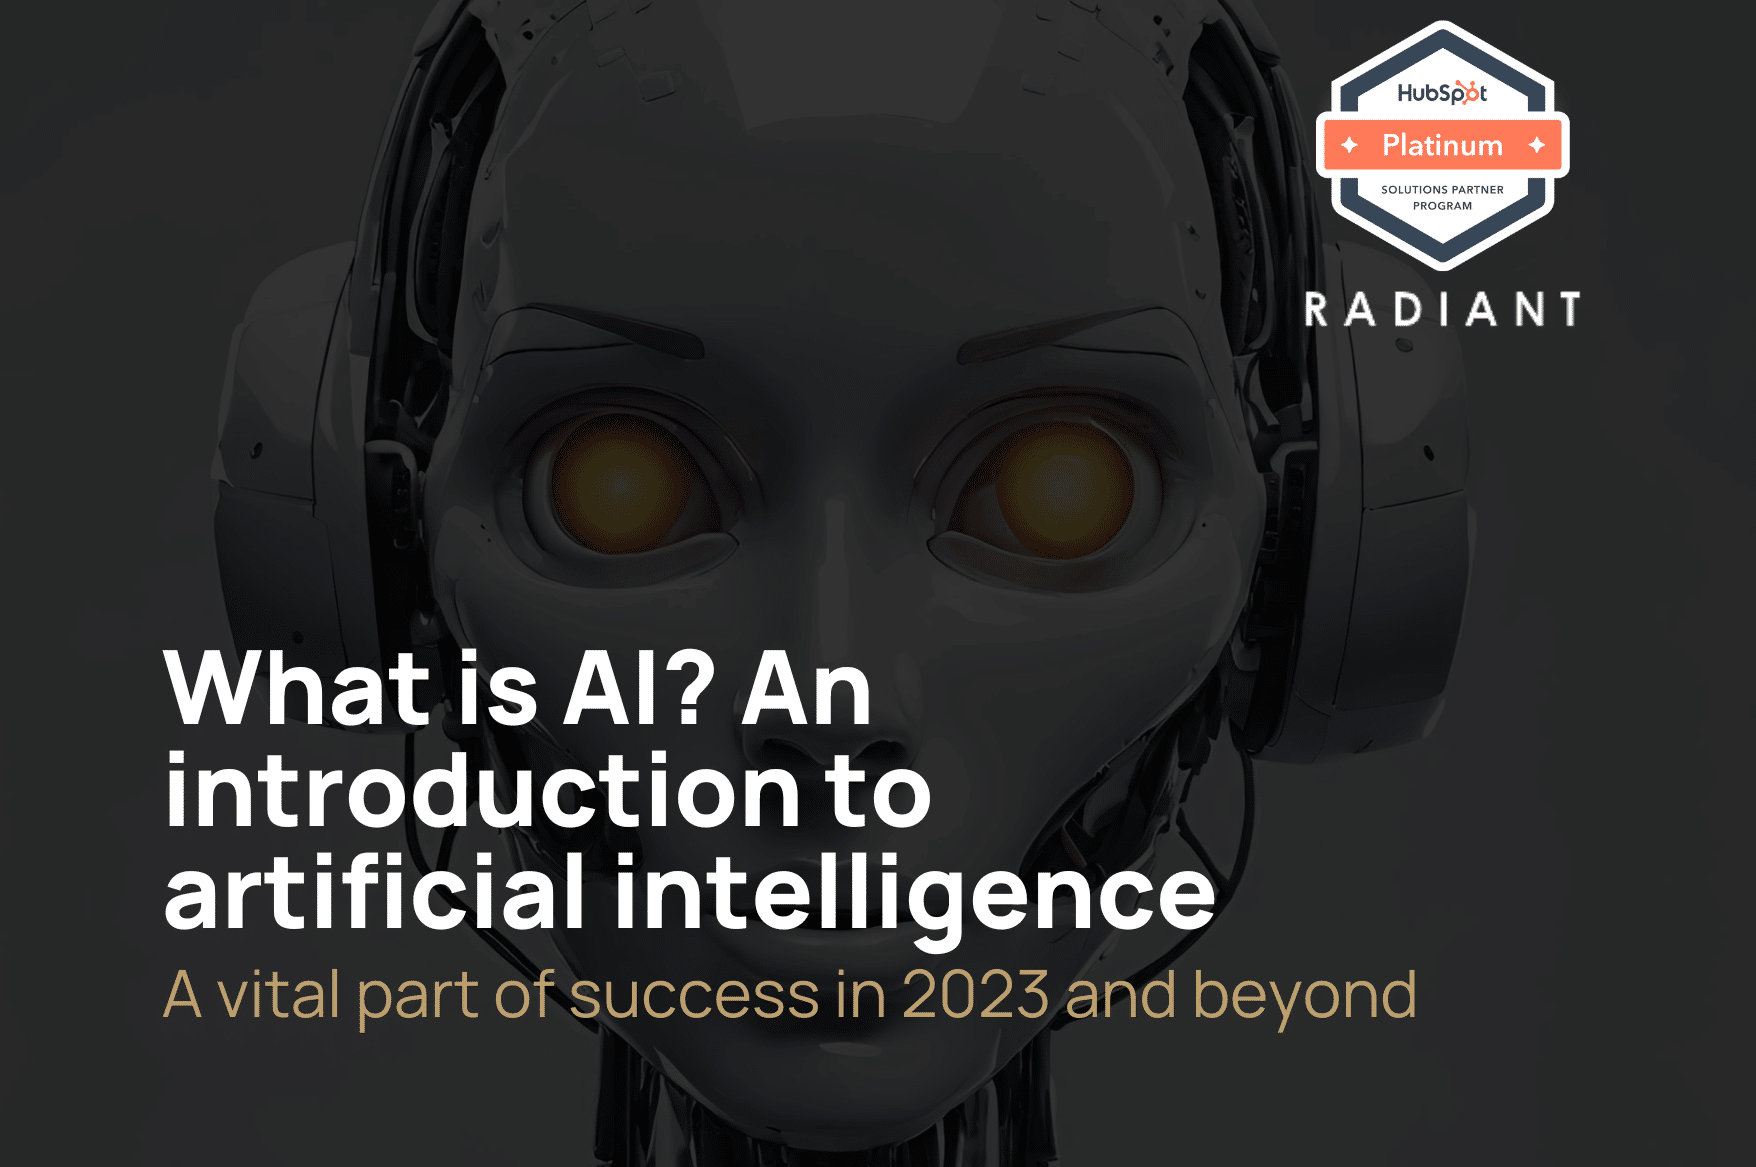 What is AI? An introduction to artificial intelligence